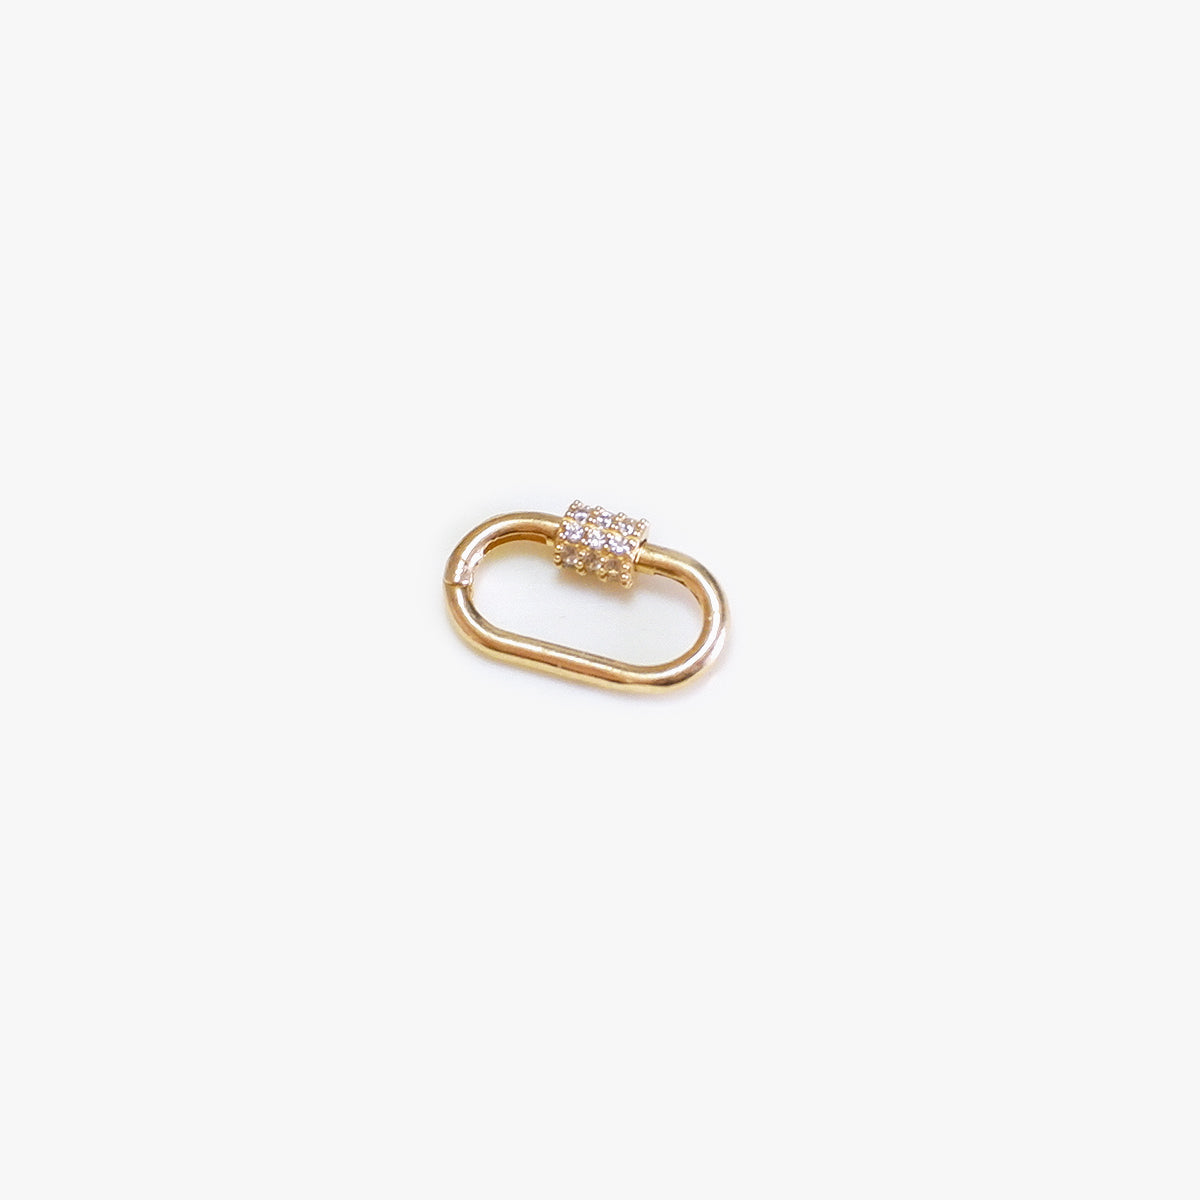 Dainty Carabiner in Solid Gold